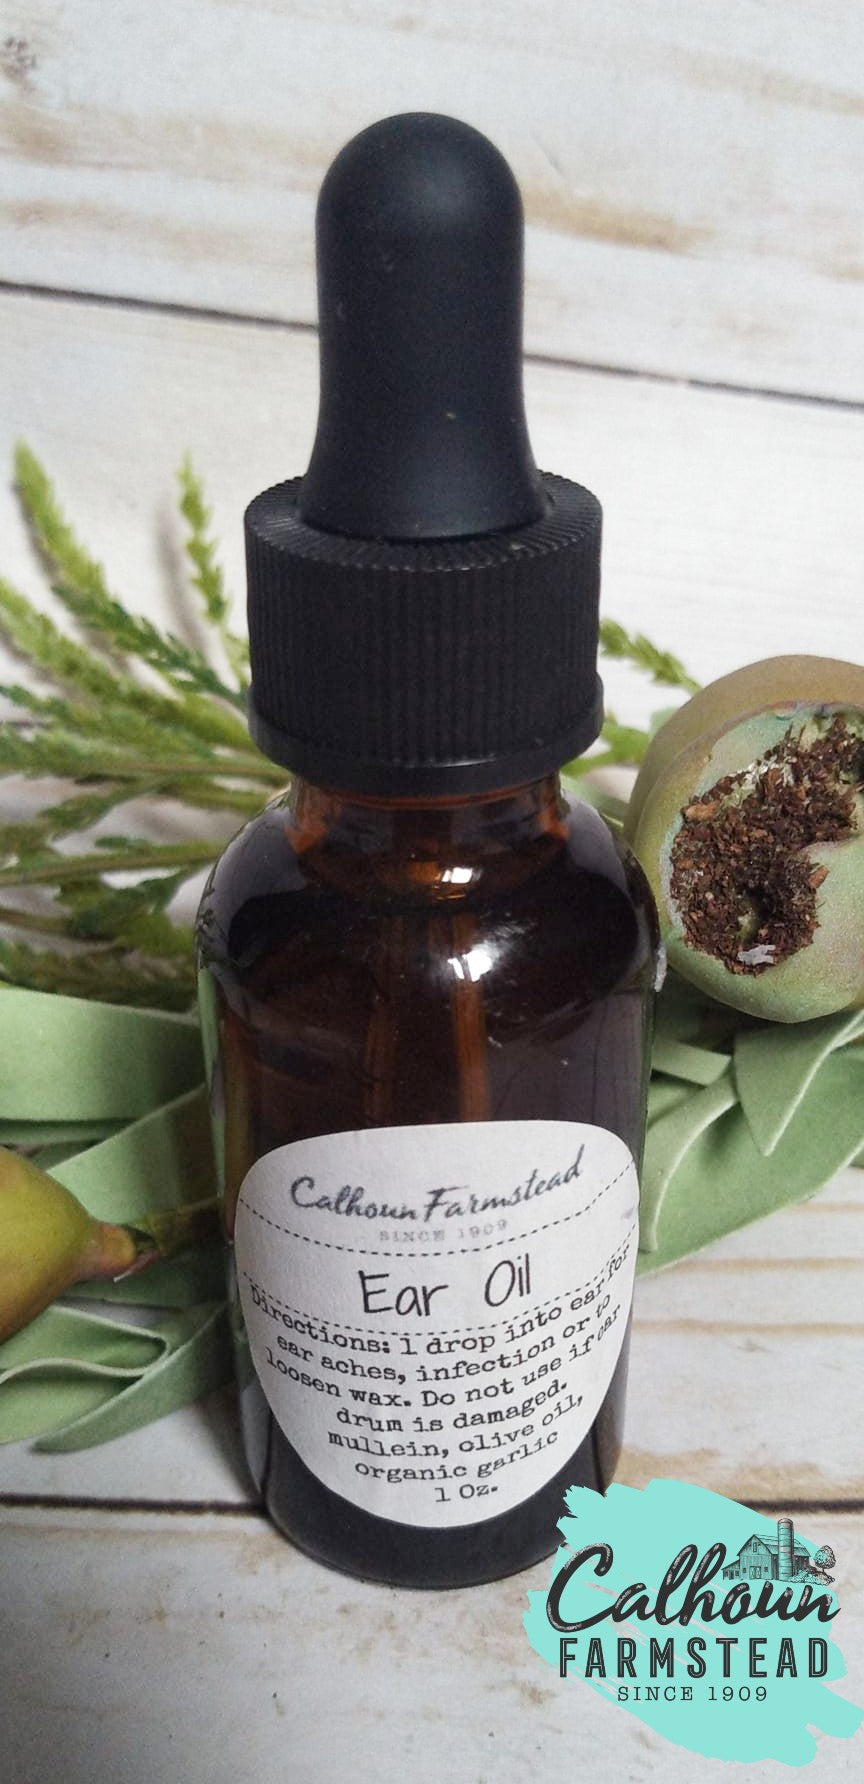 ear oil for ear aches, ear infections. Helps clear and loosen wax buildup